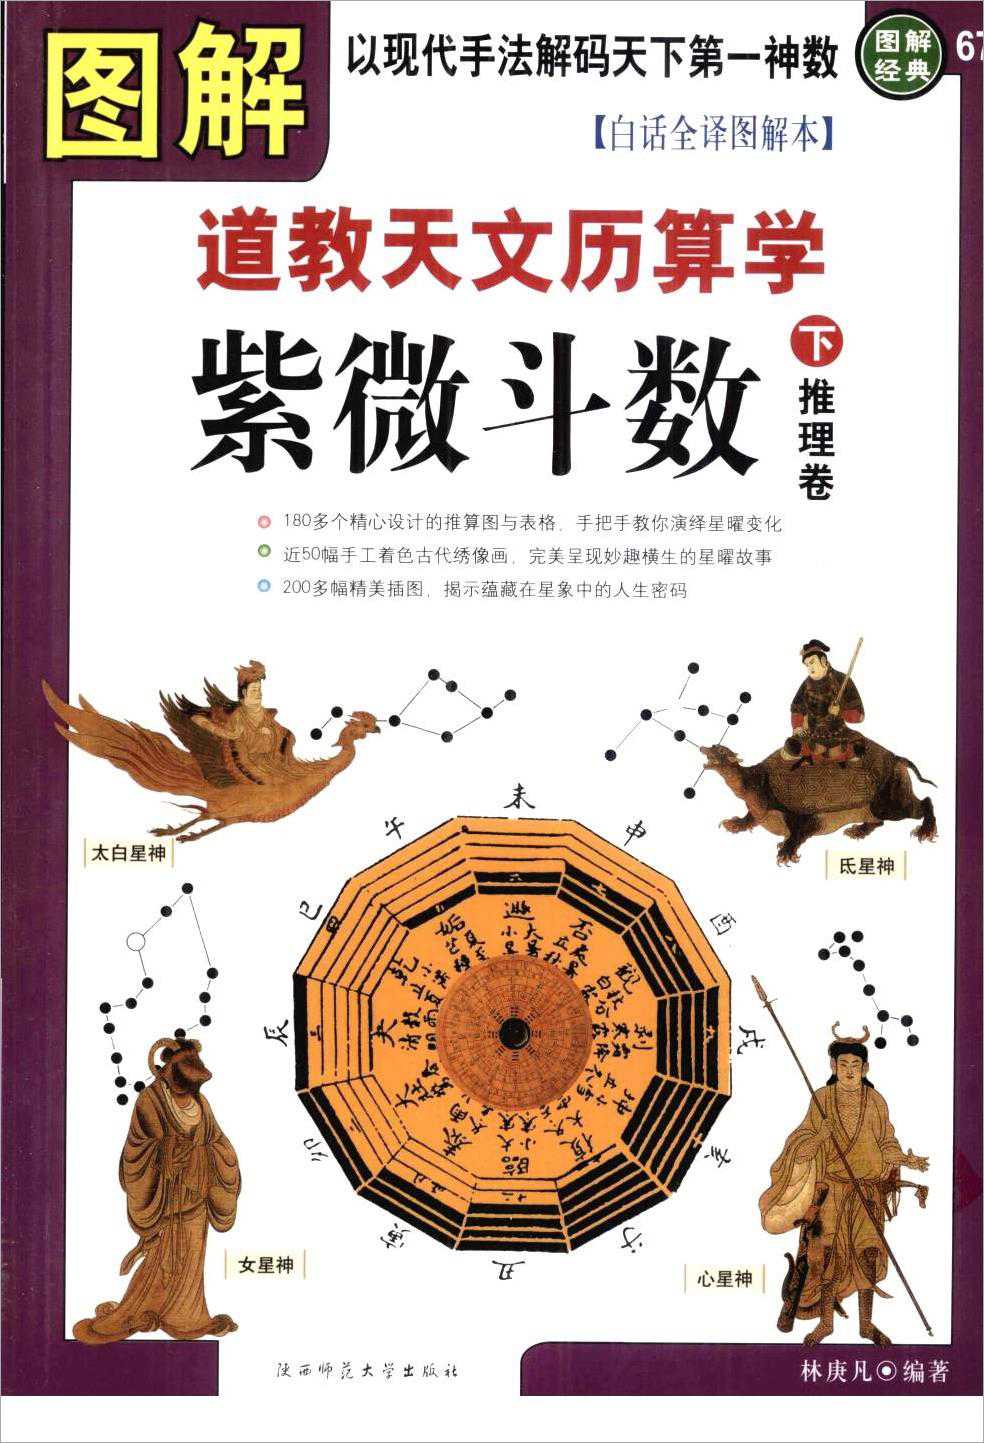 Lin Gengfan-Illustrated Taoist Astronomy, Calendar and Arithmetic – Purple Wei Dou Shuo Reasoning Volume (579 pages).pdf